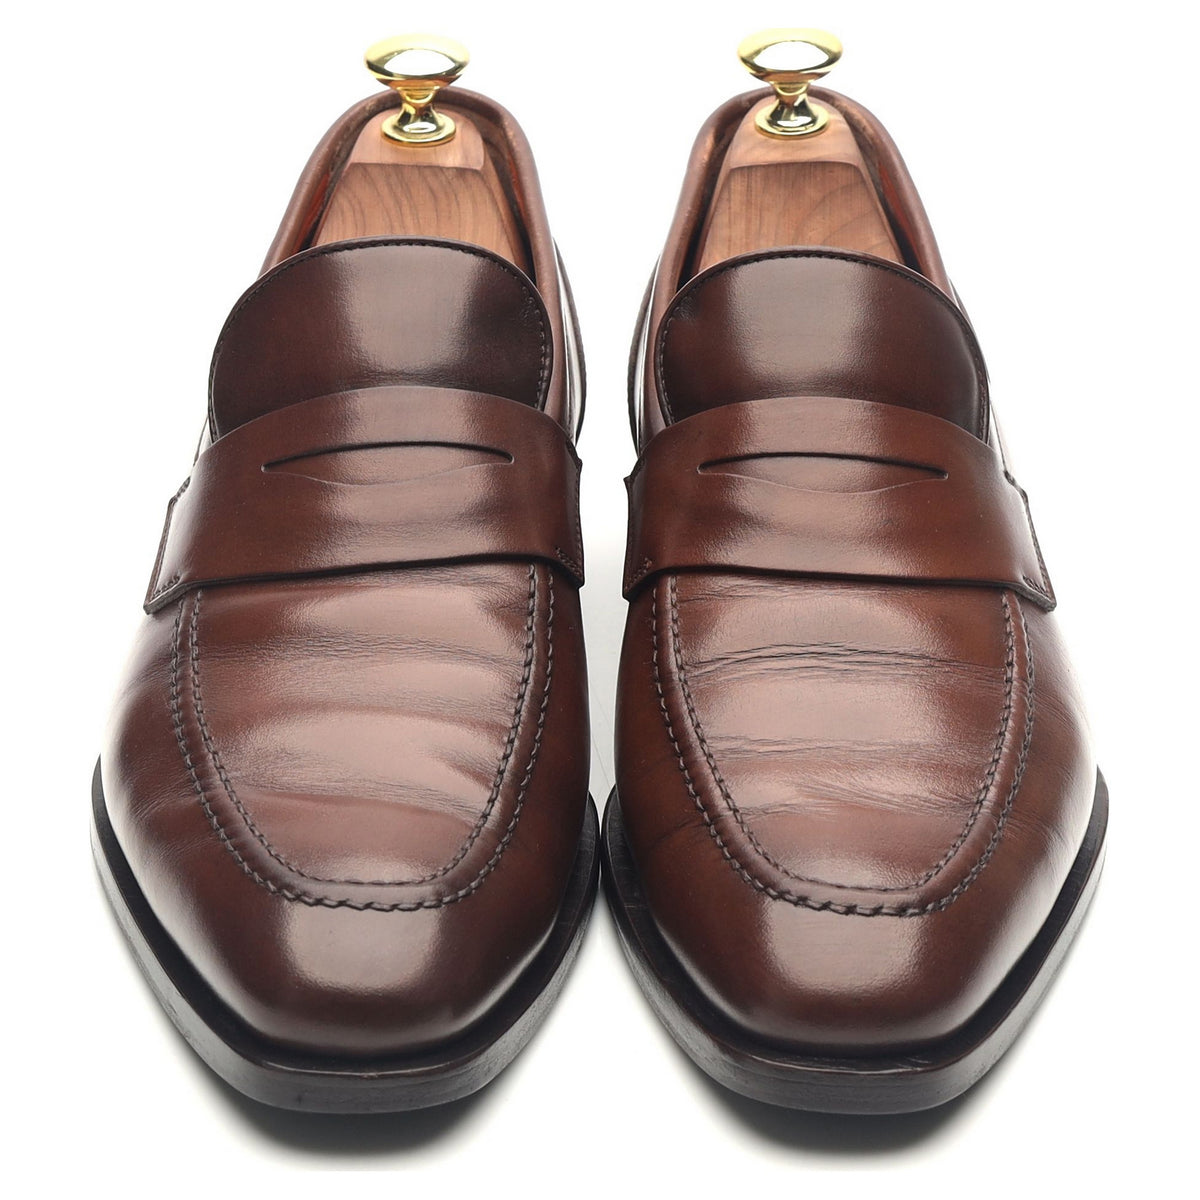 Brown Leather Loafers UK 7